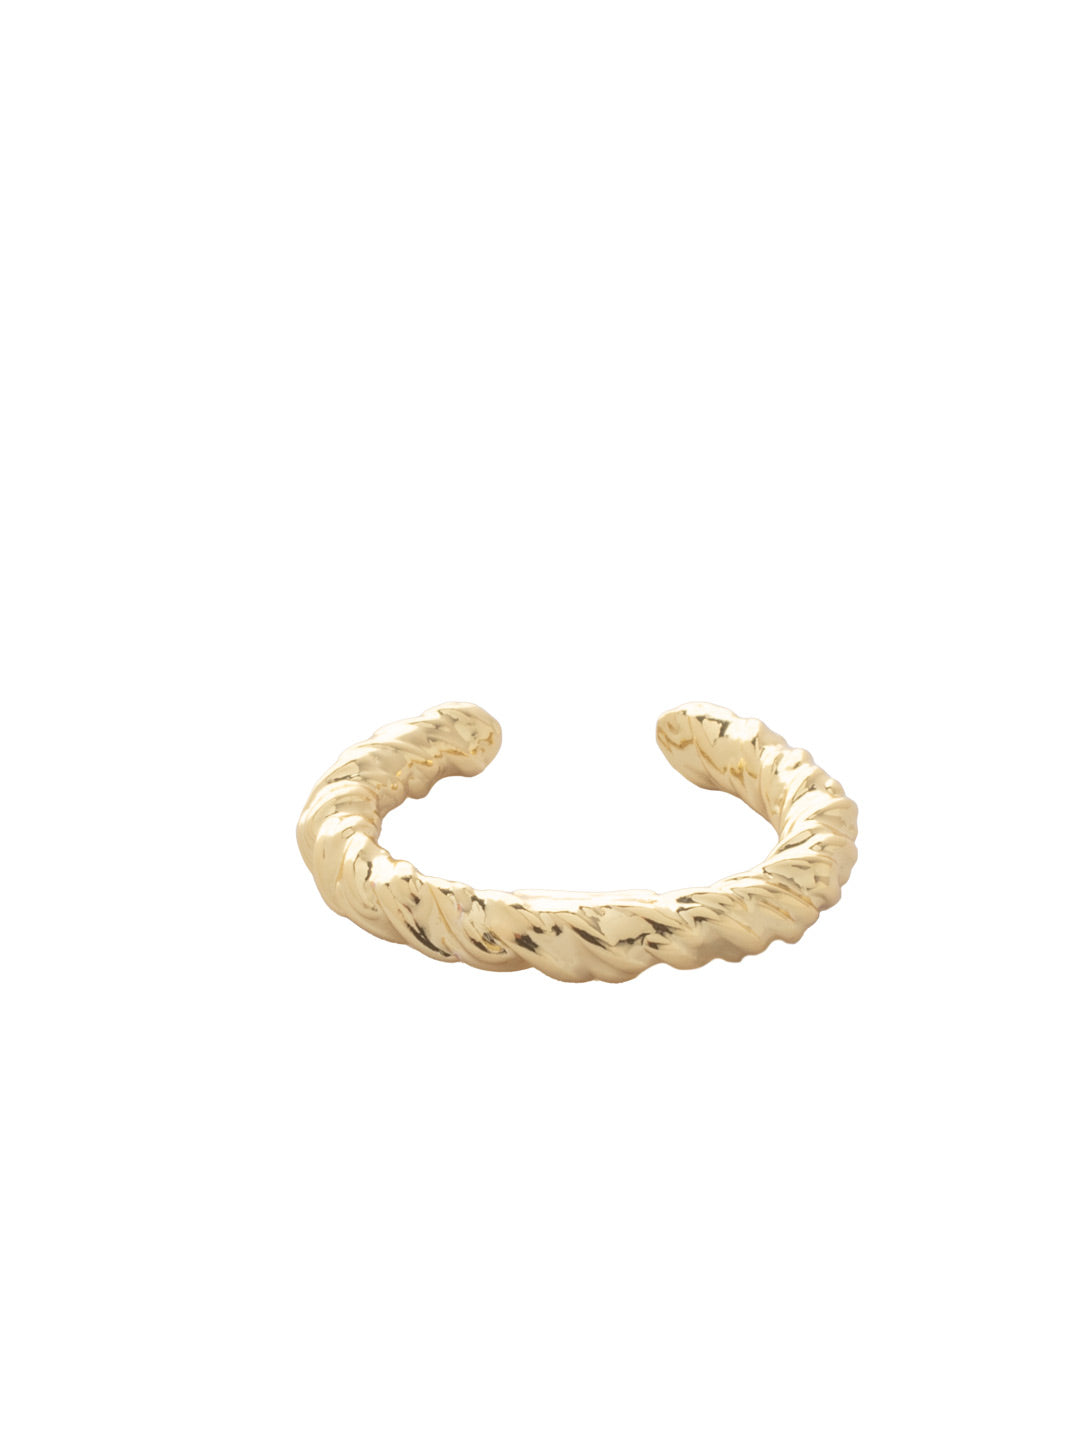 Olive Band Ring - RFL1BGMTL - <p>The Olive Band Ring features an adjustable twisted rope metal chain band From Sorrelli's Bare Metallic collection in our Bright Gold-tone finish.</p>